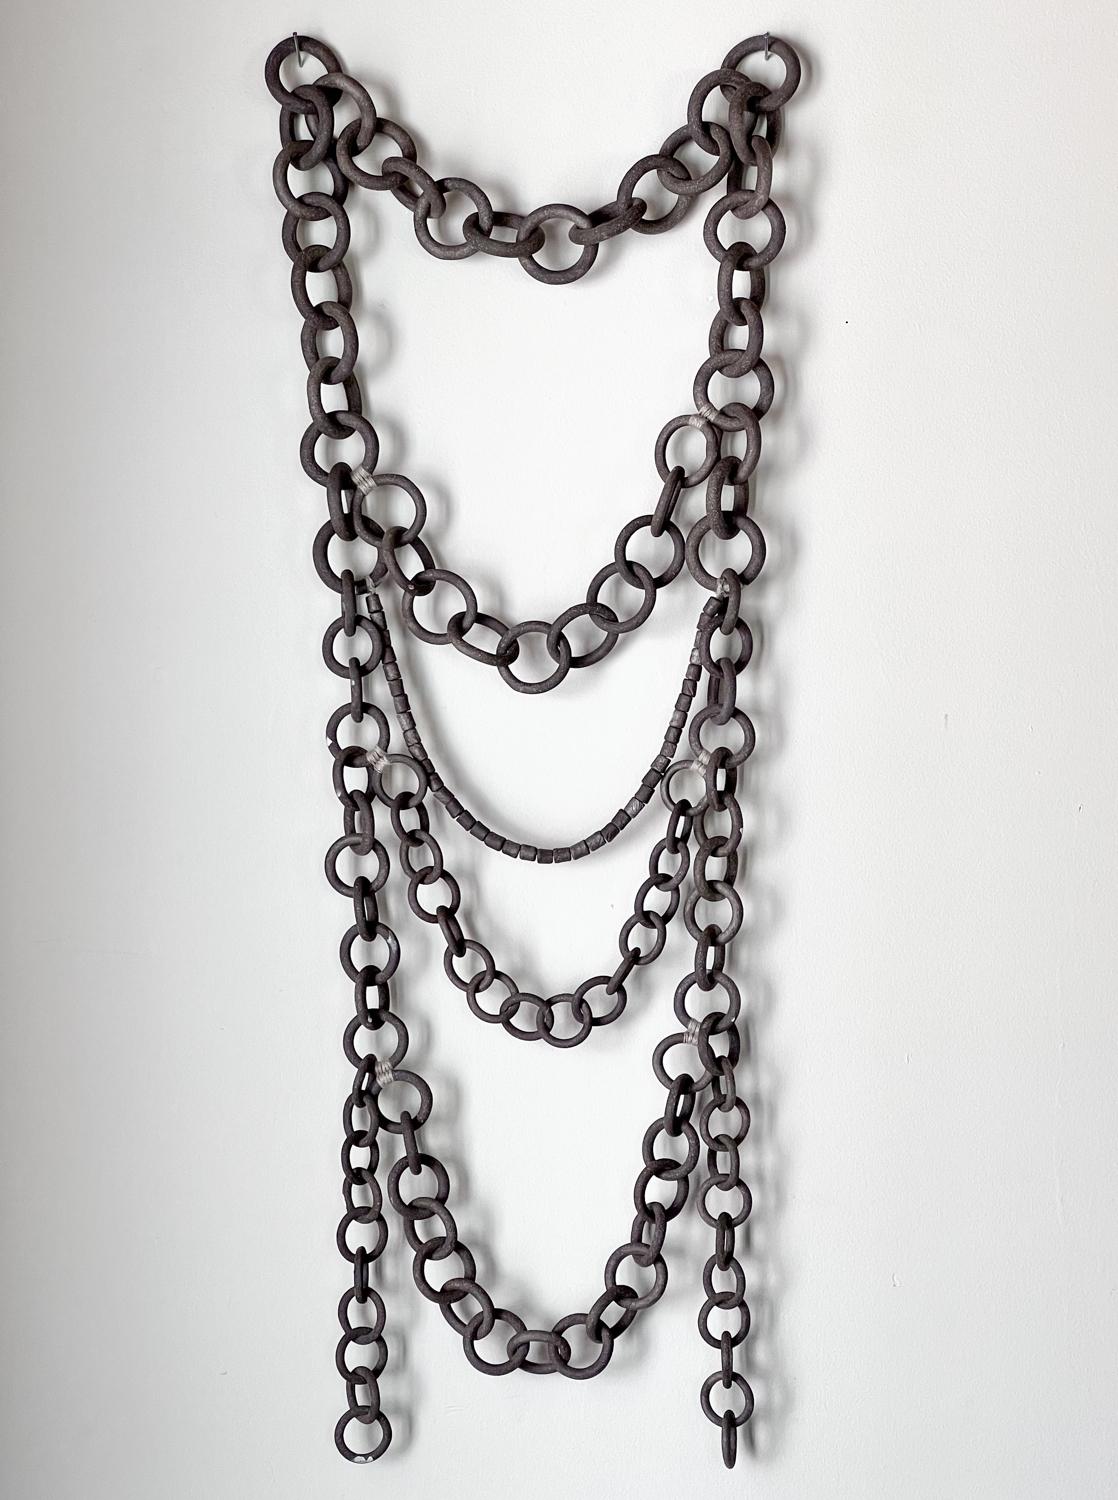 Ceramic Stoneware Link Chain Wall Sculpture For Sale 4